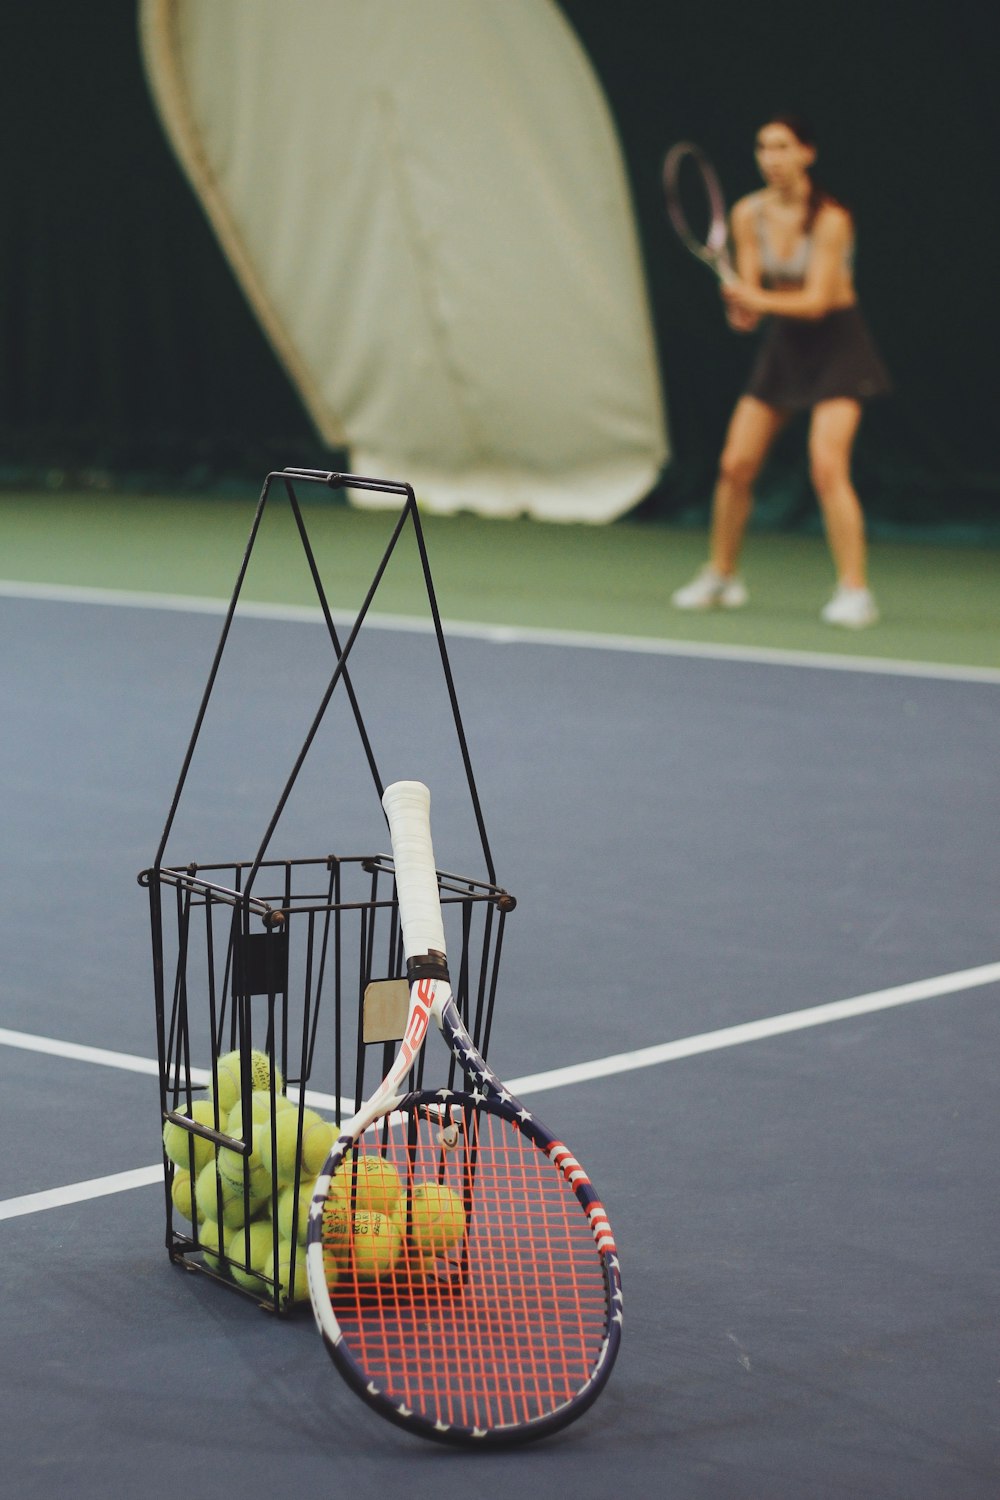 woman standing and holding tennis racket at the tennis court